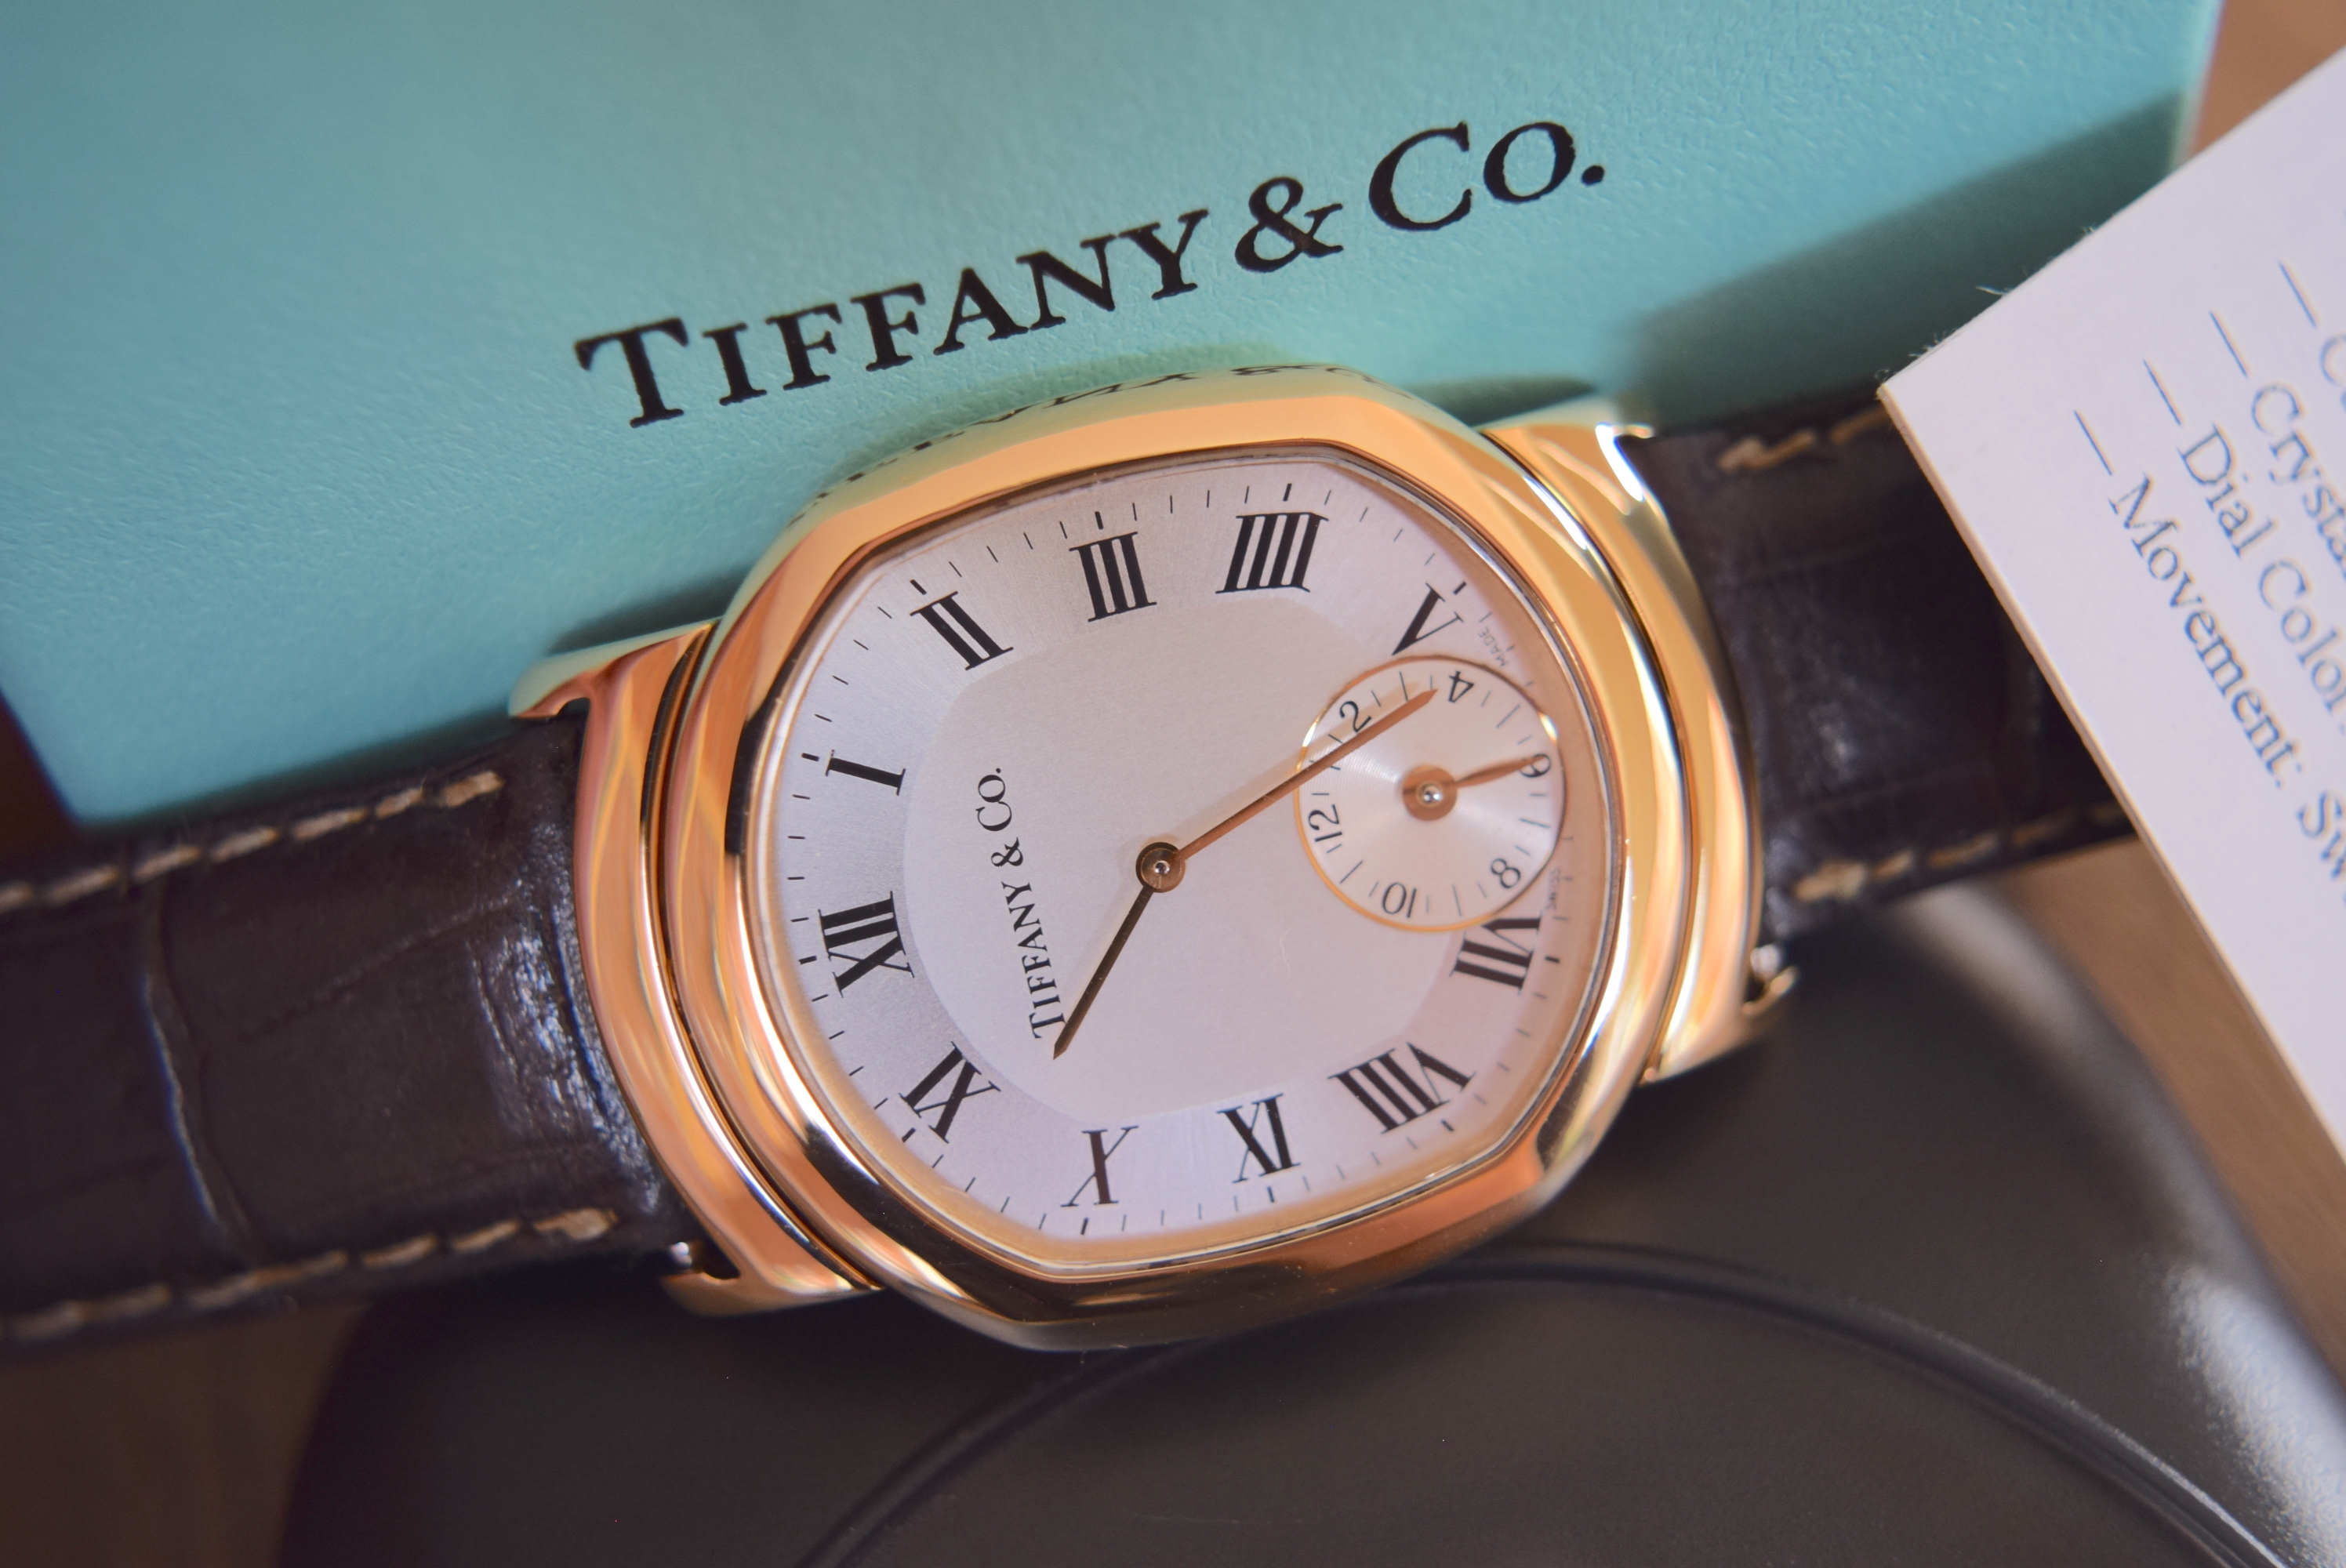 RARE 18K GOLD TIFFANY & CO. "TONNEAU" DUAL-TIME GENTS WRISTWATCH (WITH £9,000 VALUATION) - Image 5 of 10